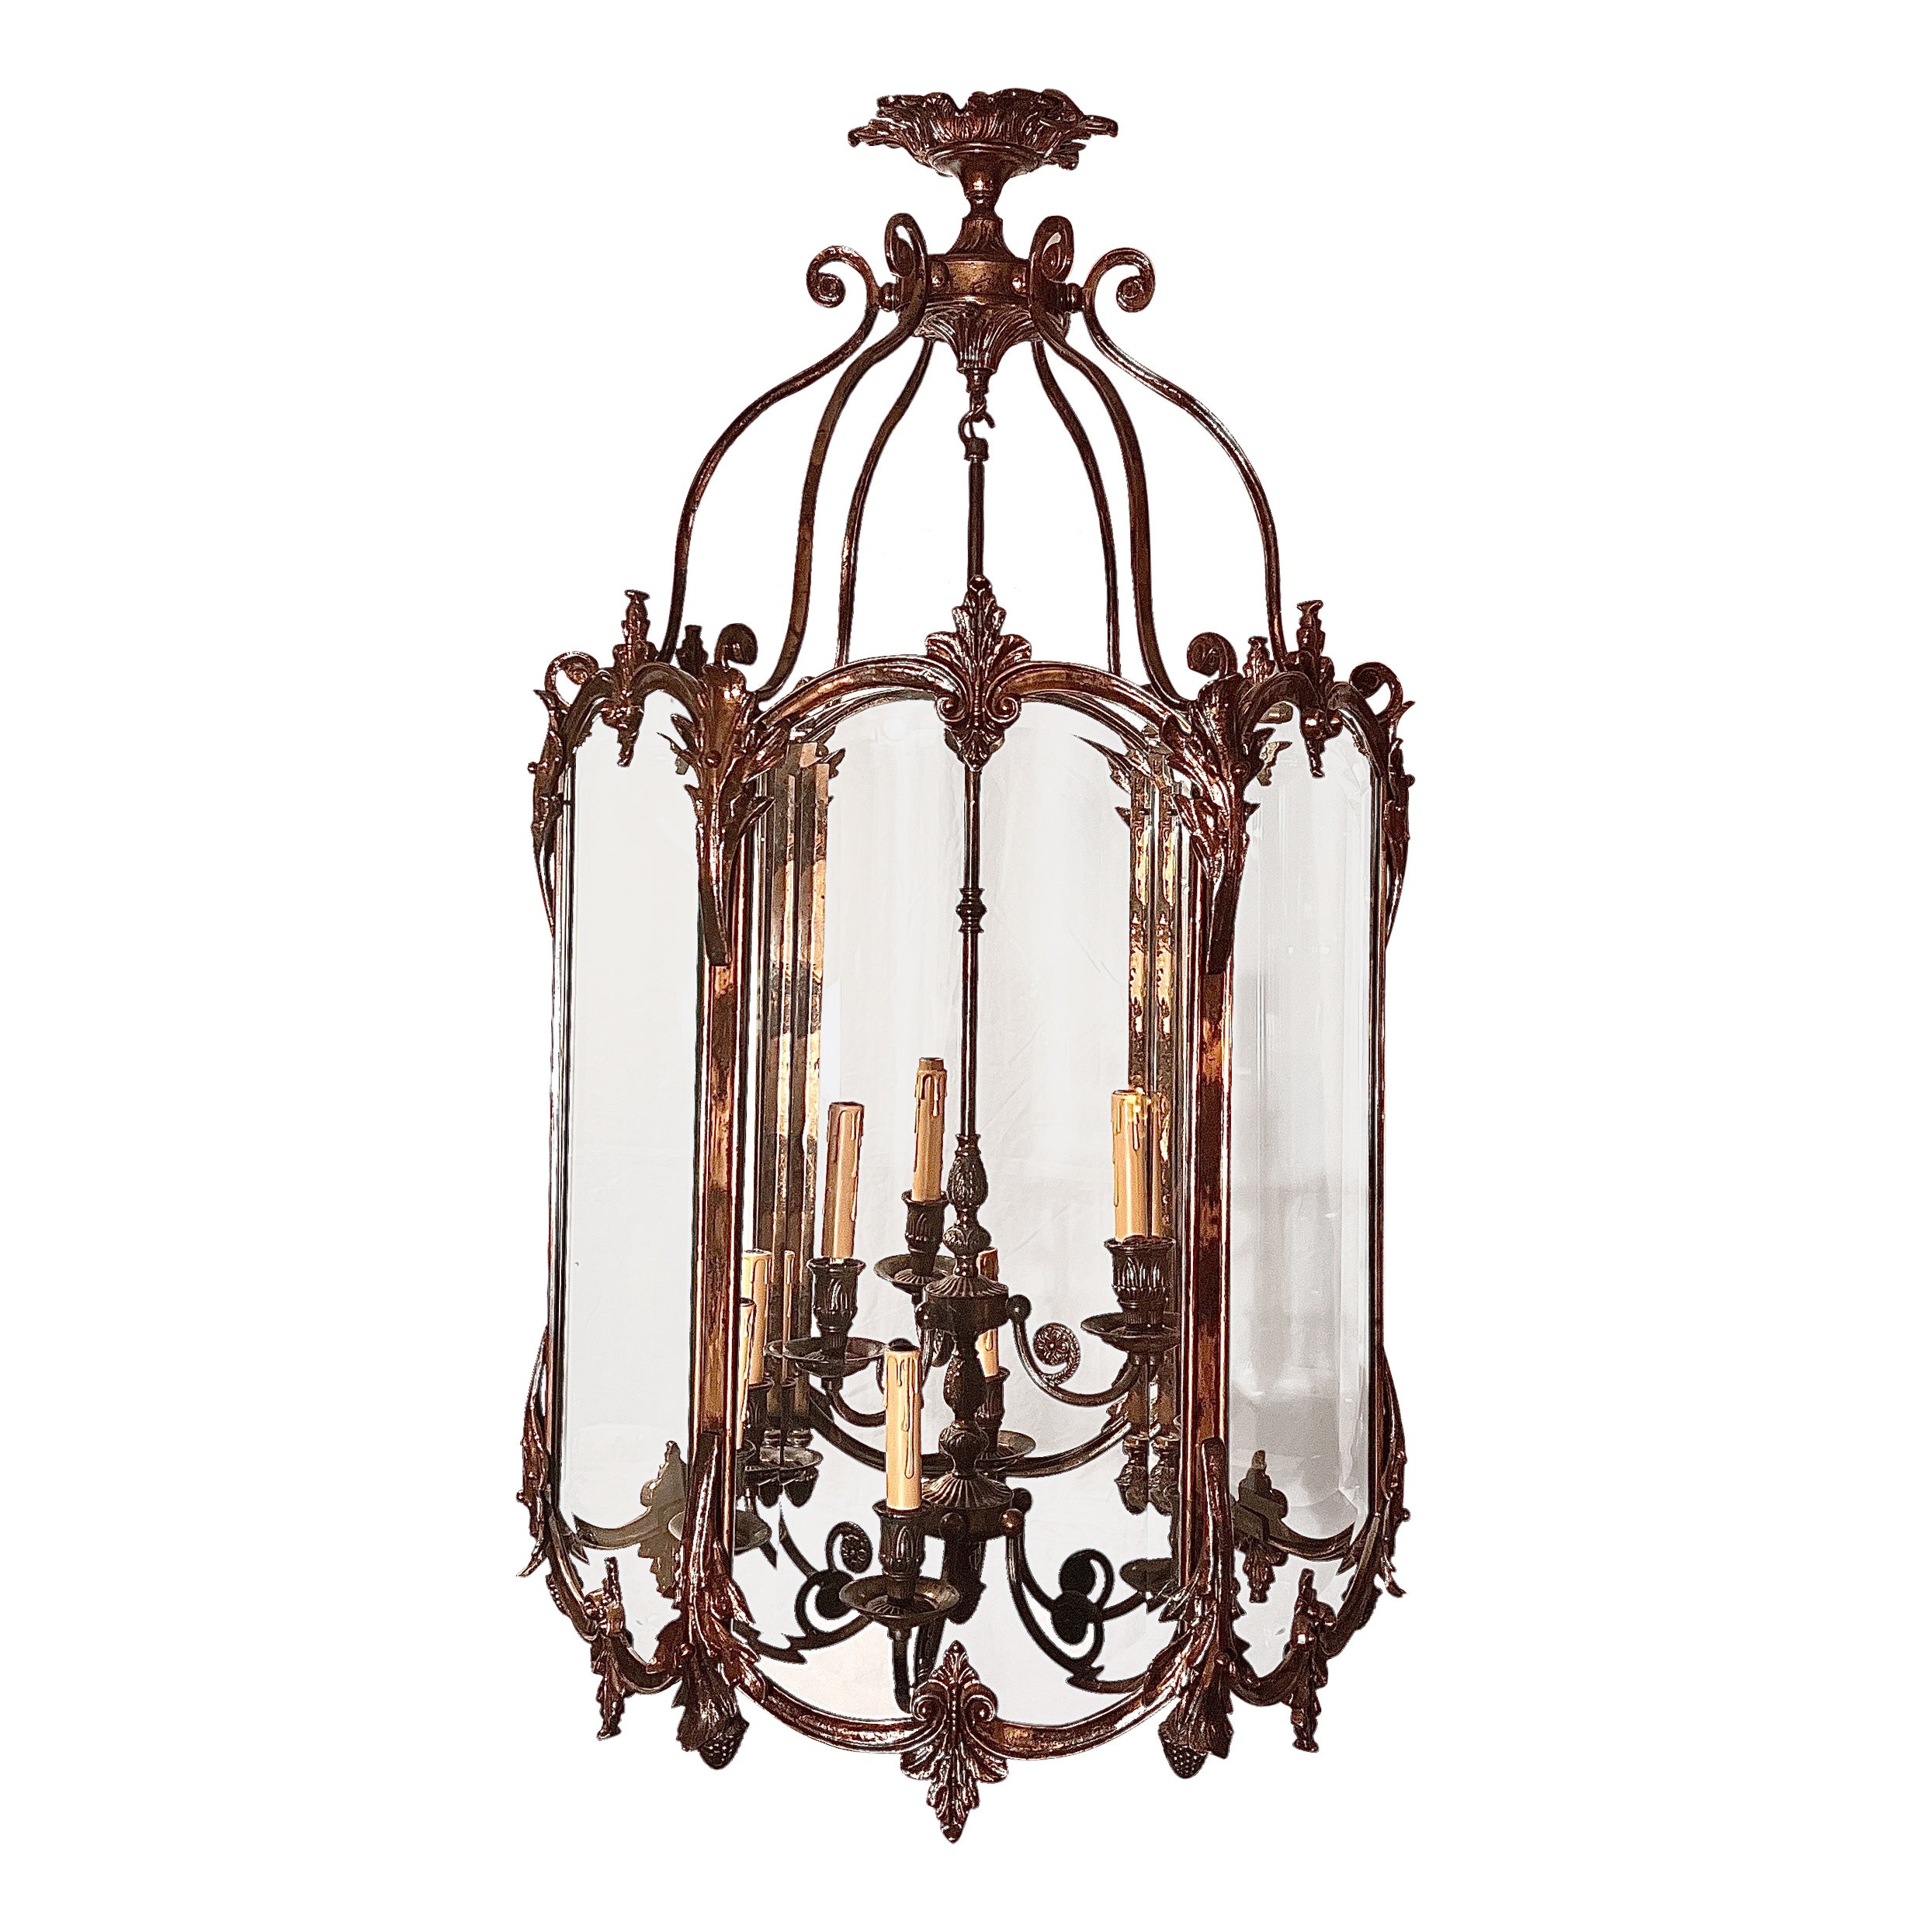 Antique Bronze Lantern with Beveled Glass, Circa 1910-1920. For Sale